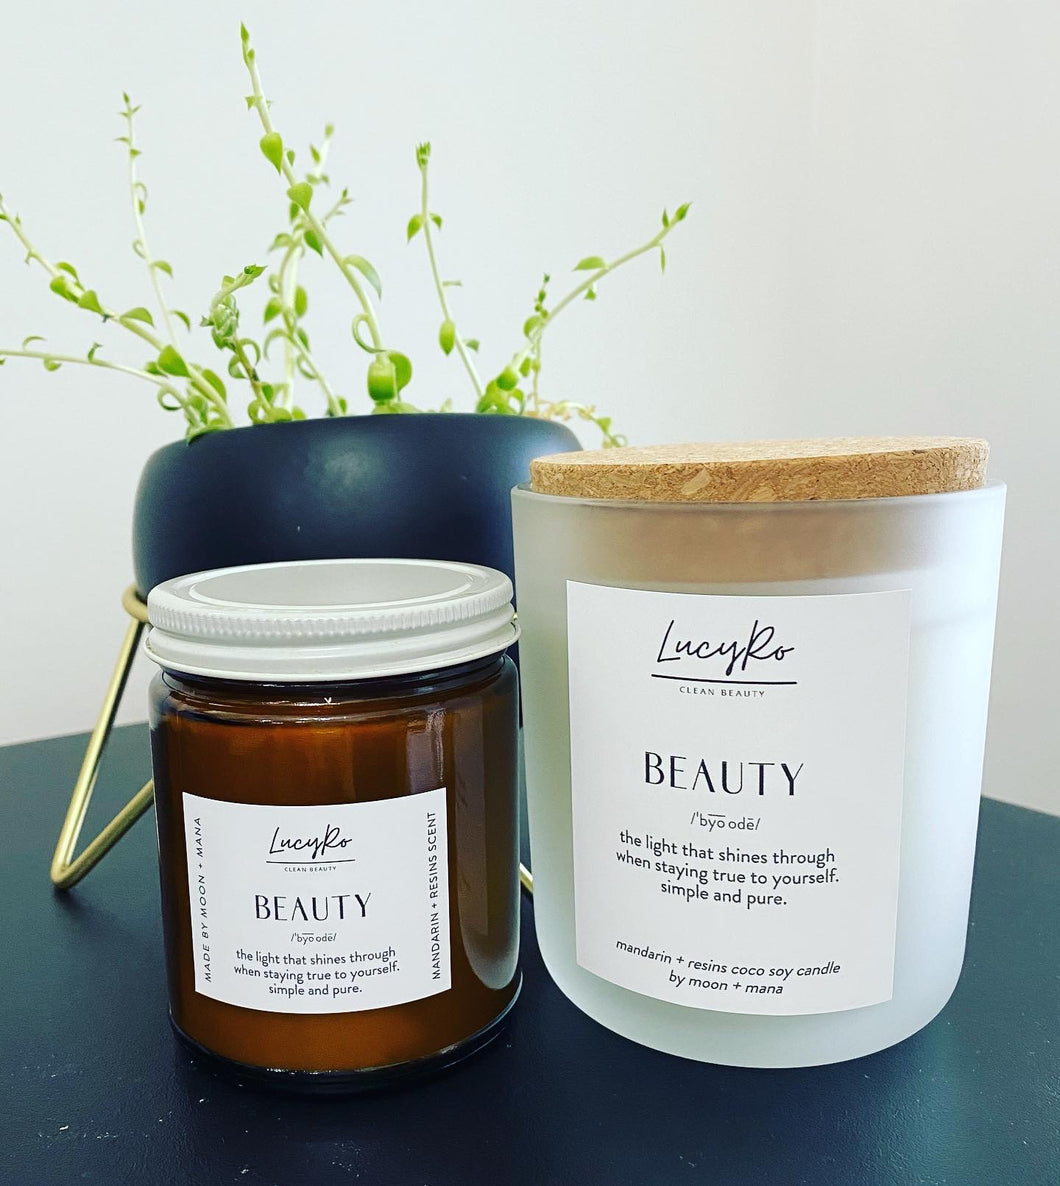 Lucy Ro “Beauty” Candle